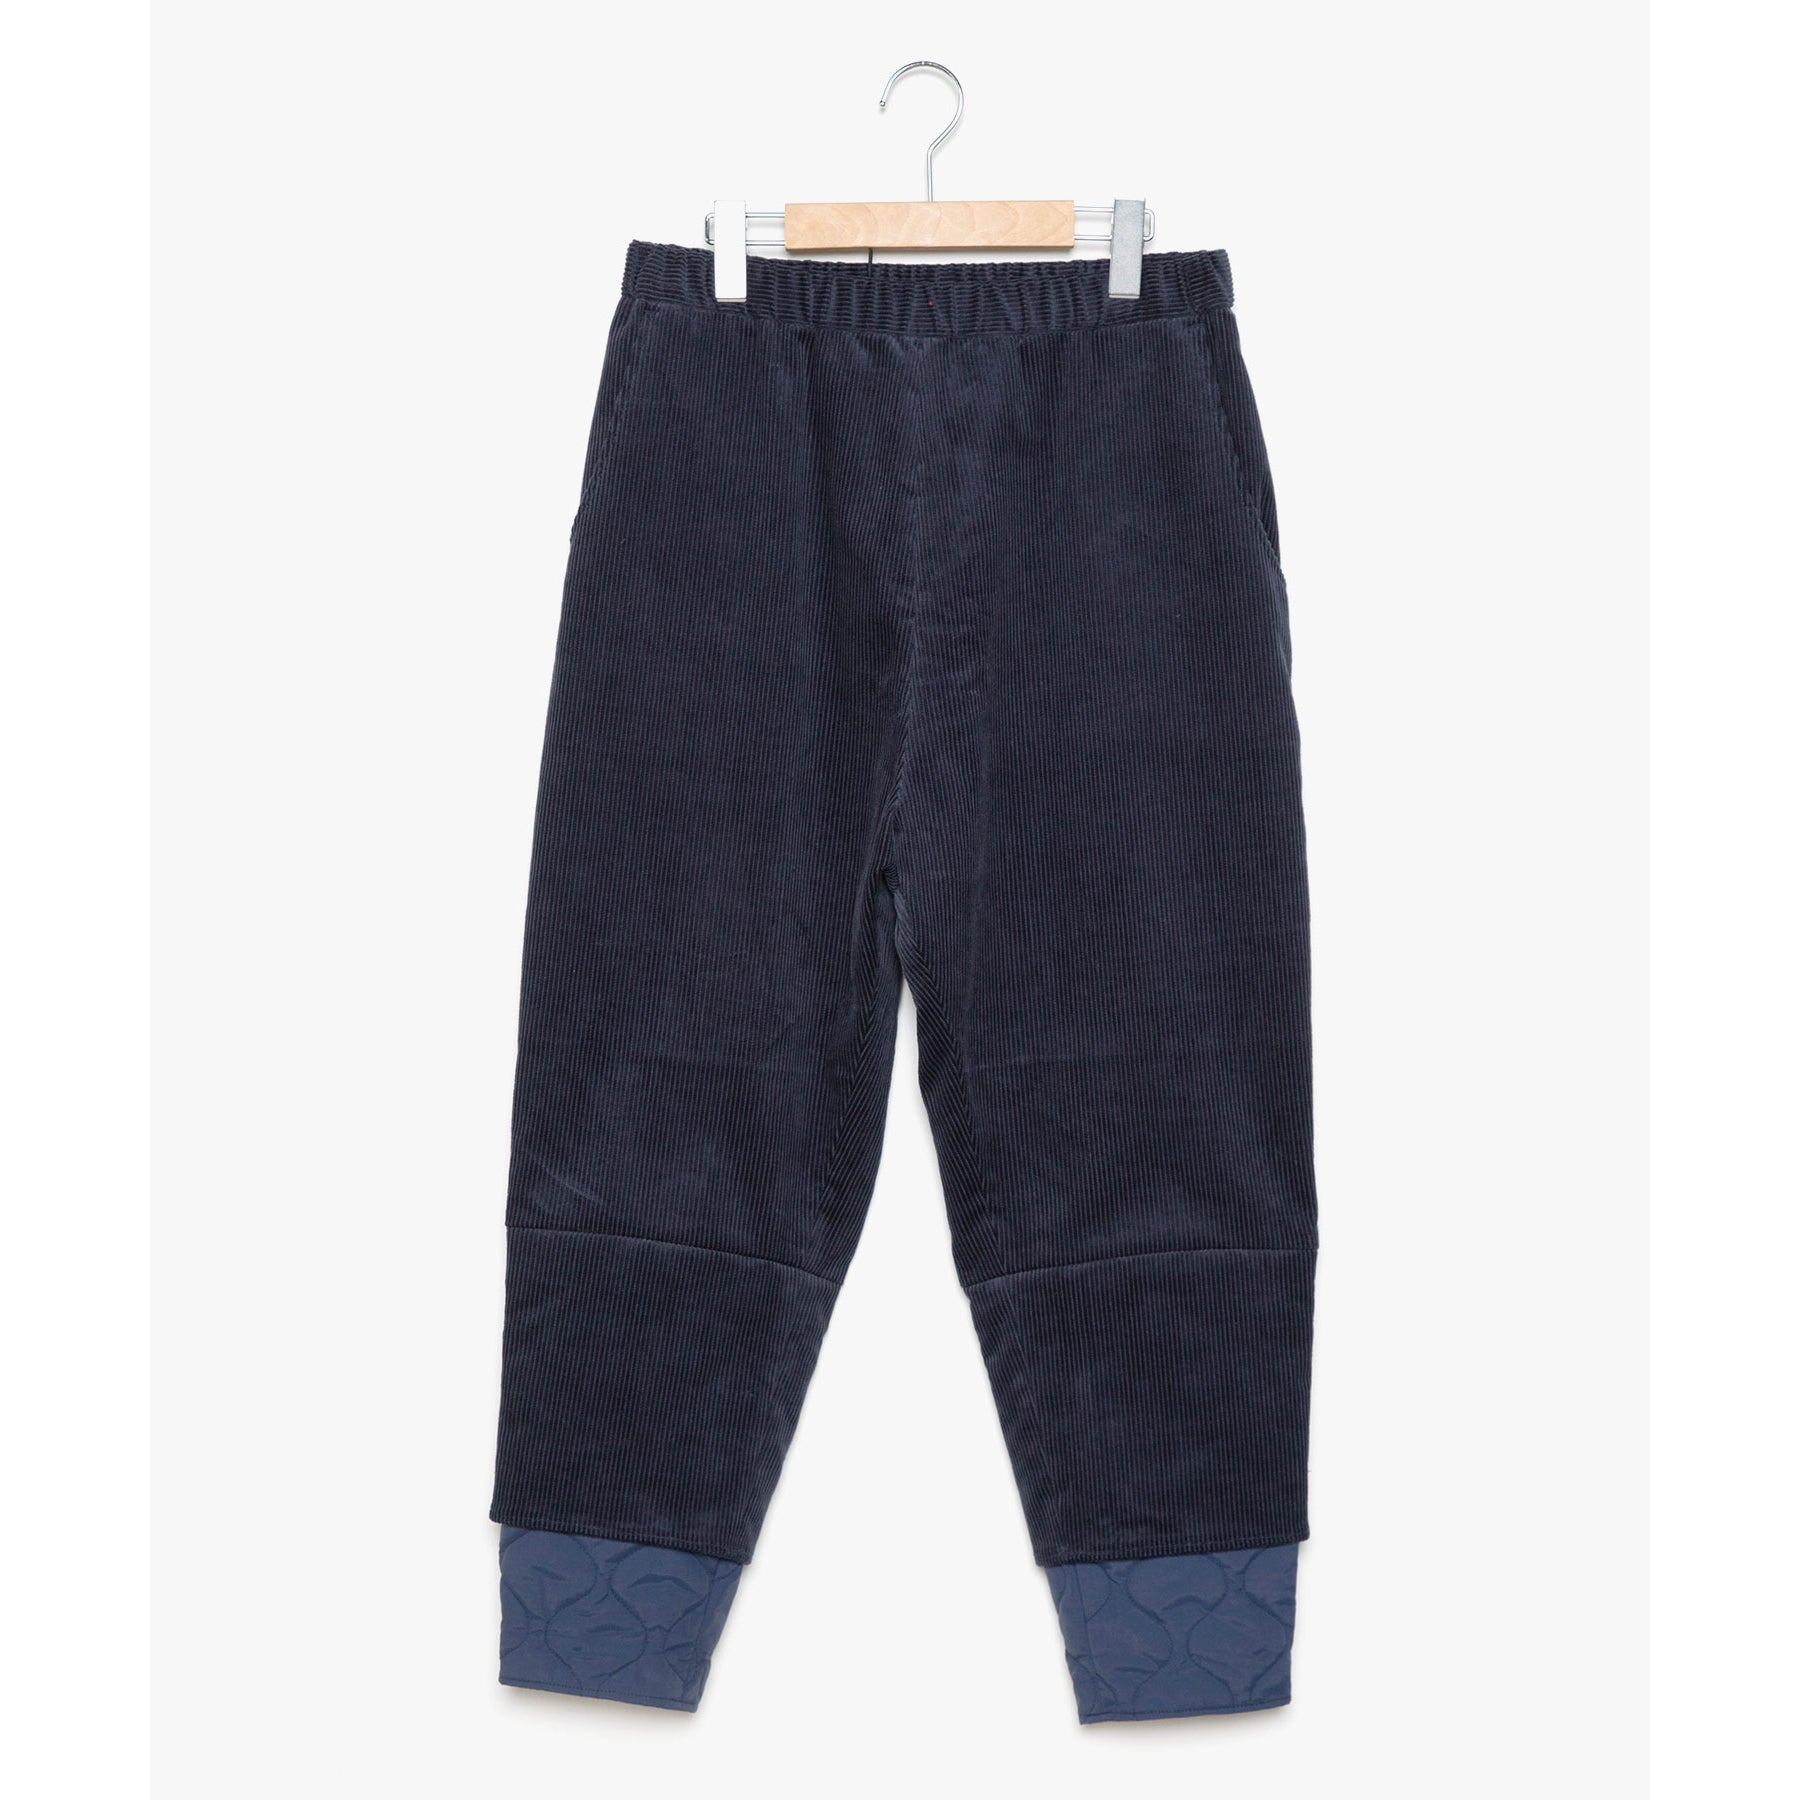 No:SF24AW-02_BLUE | Name:Layer Corduroy Pants | Color:Blue【STOF_ストフ】【入荷予定アイテム・入荷連絡可能】